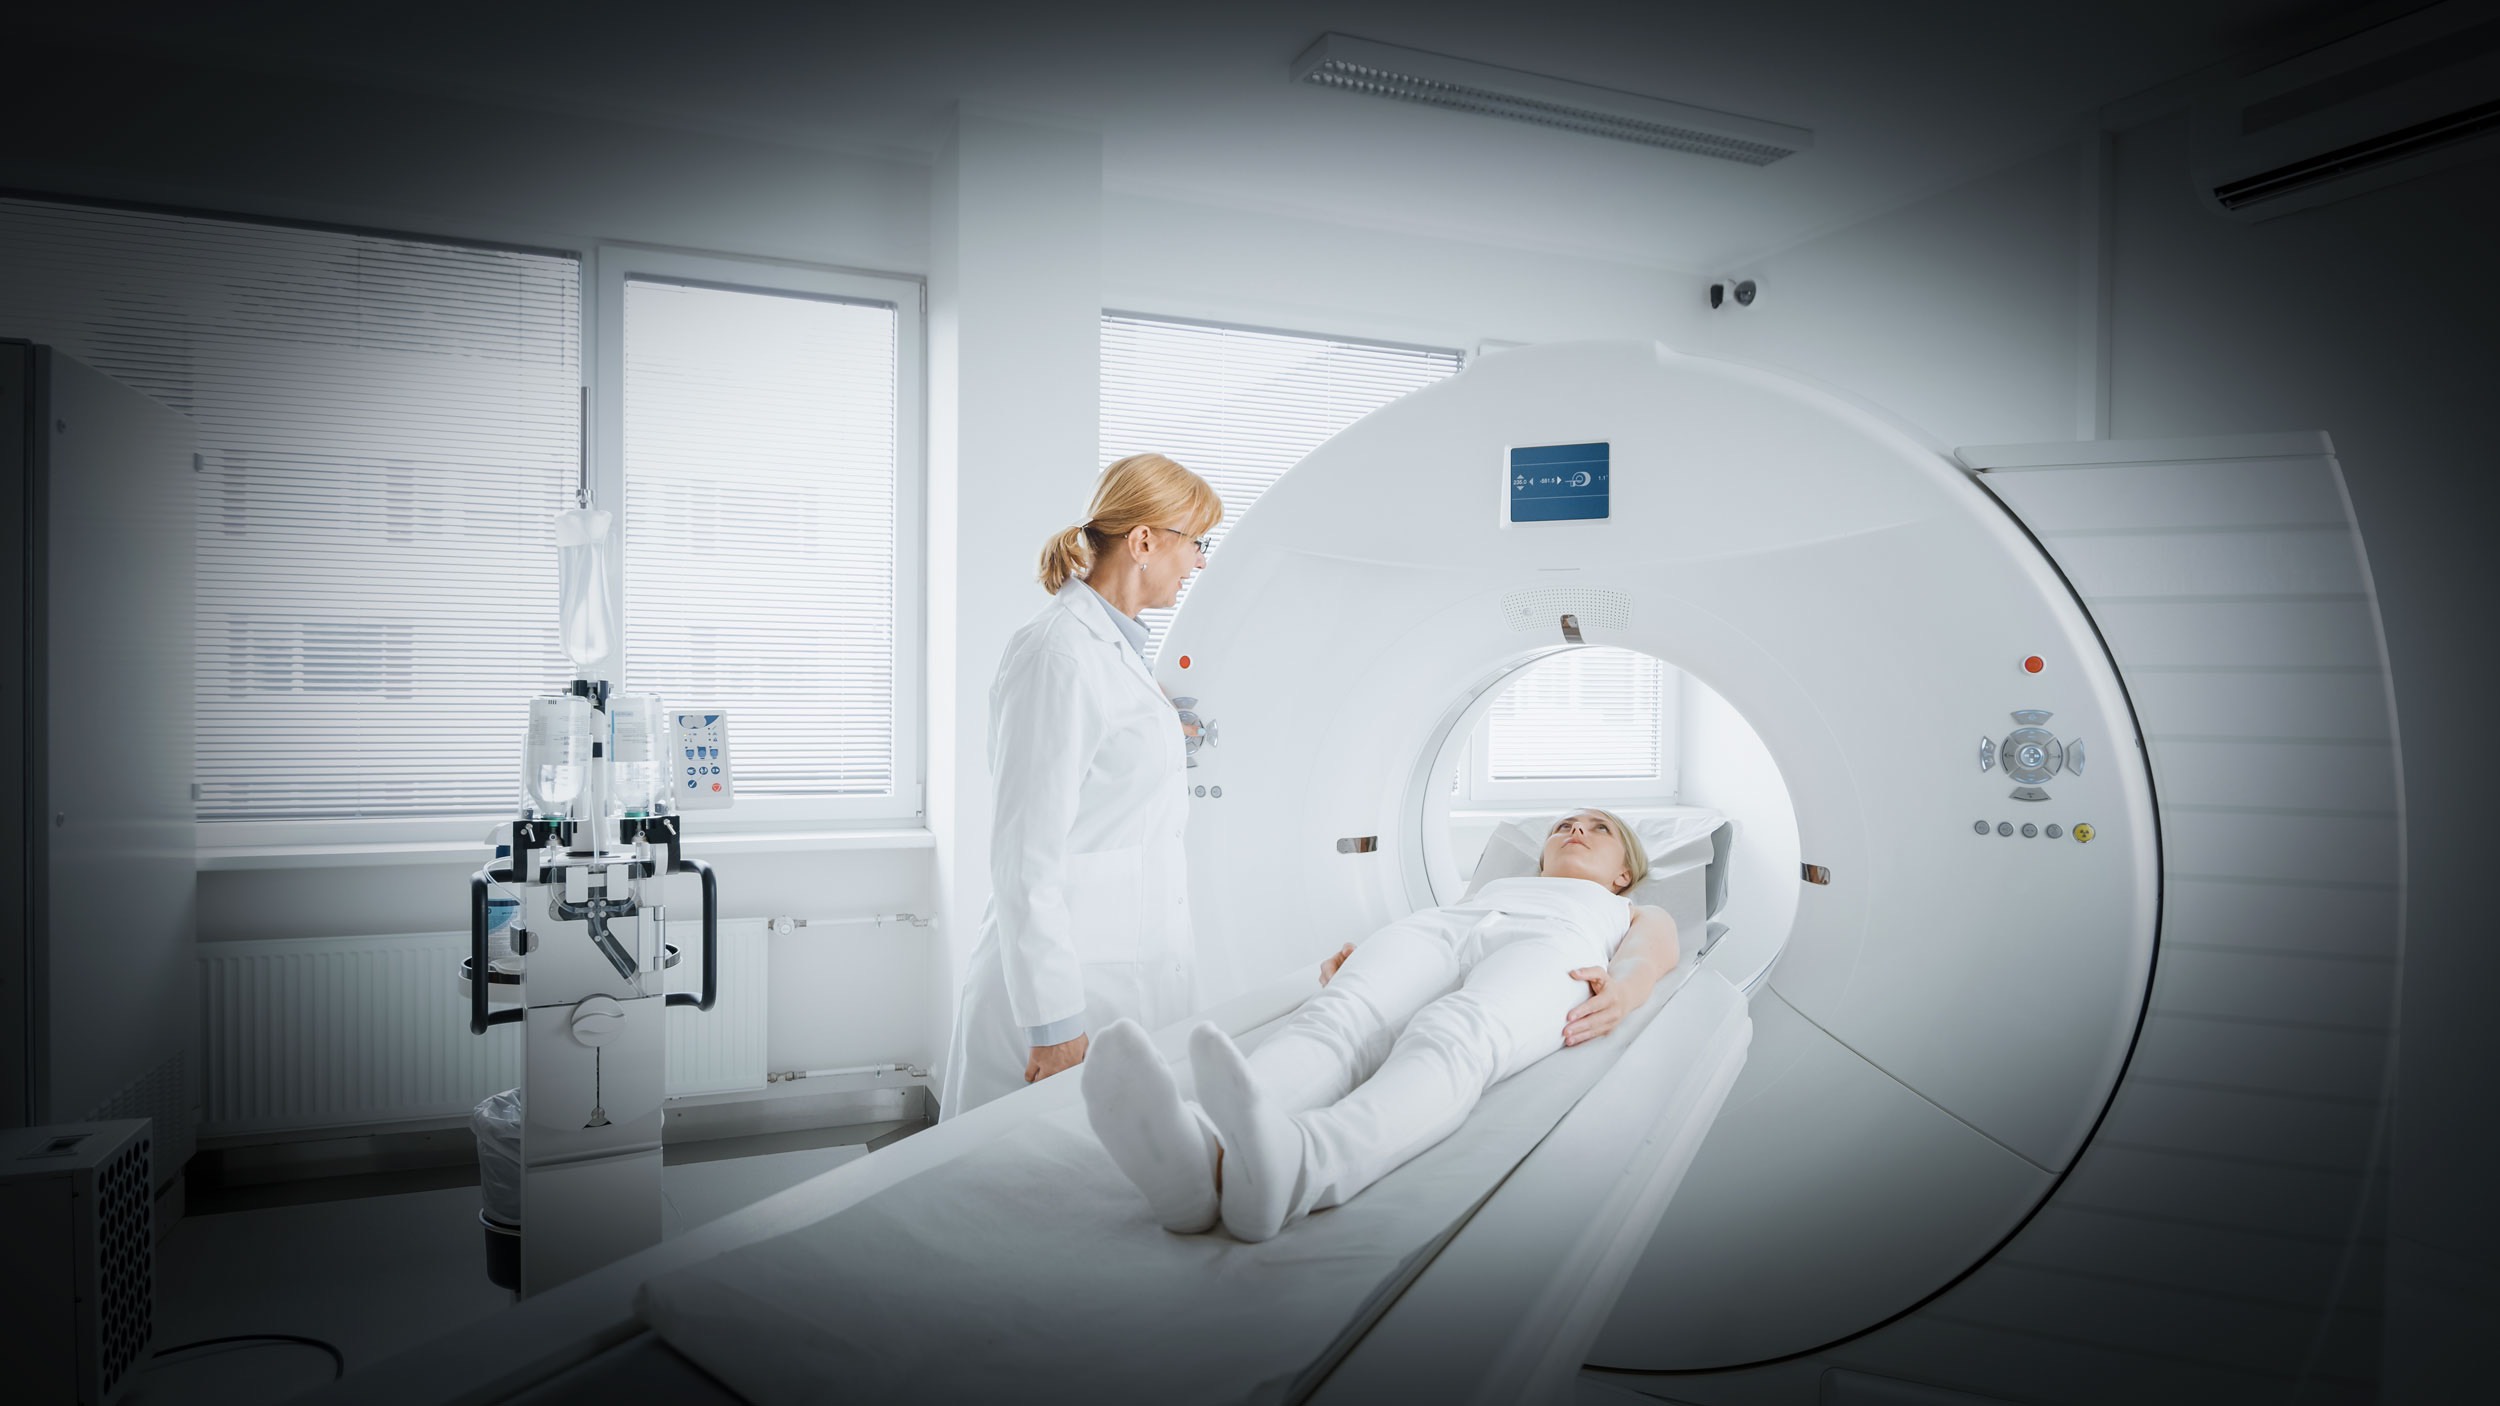 In Medical Laboratory Female Radiologist Controls MRI or CT Scan with Female Patient Undergoing Procedure. High-Tech Modern Medical Equipment.